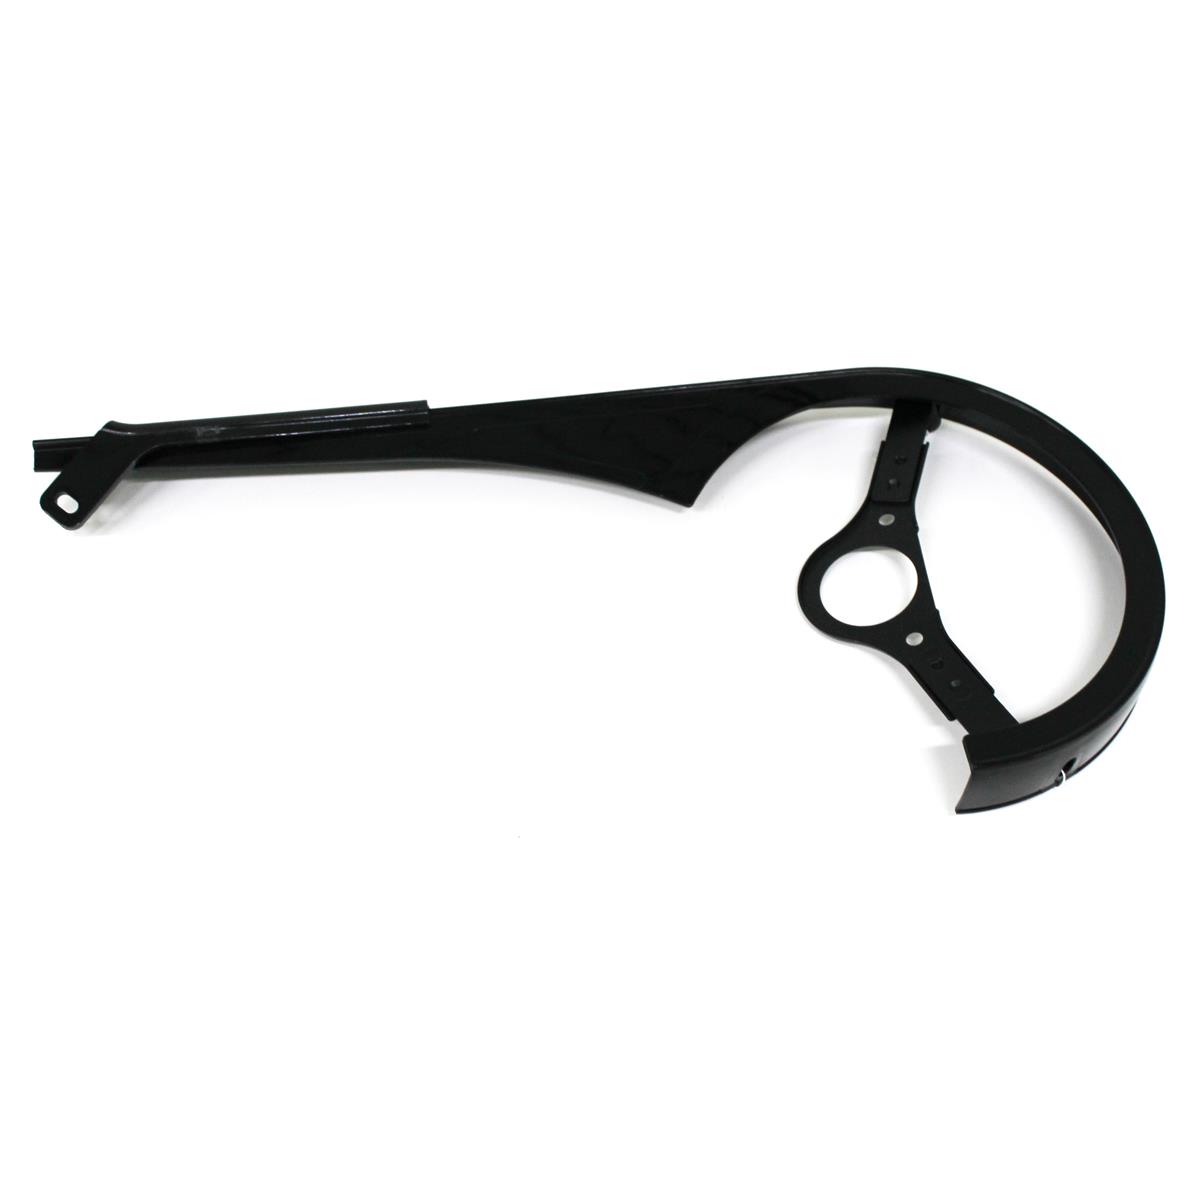 Carter CG-16 for chainrings up to 38-40t adjustable 430mm